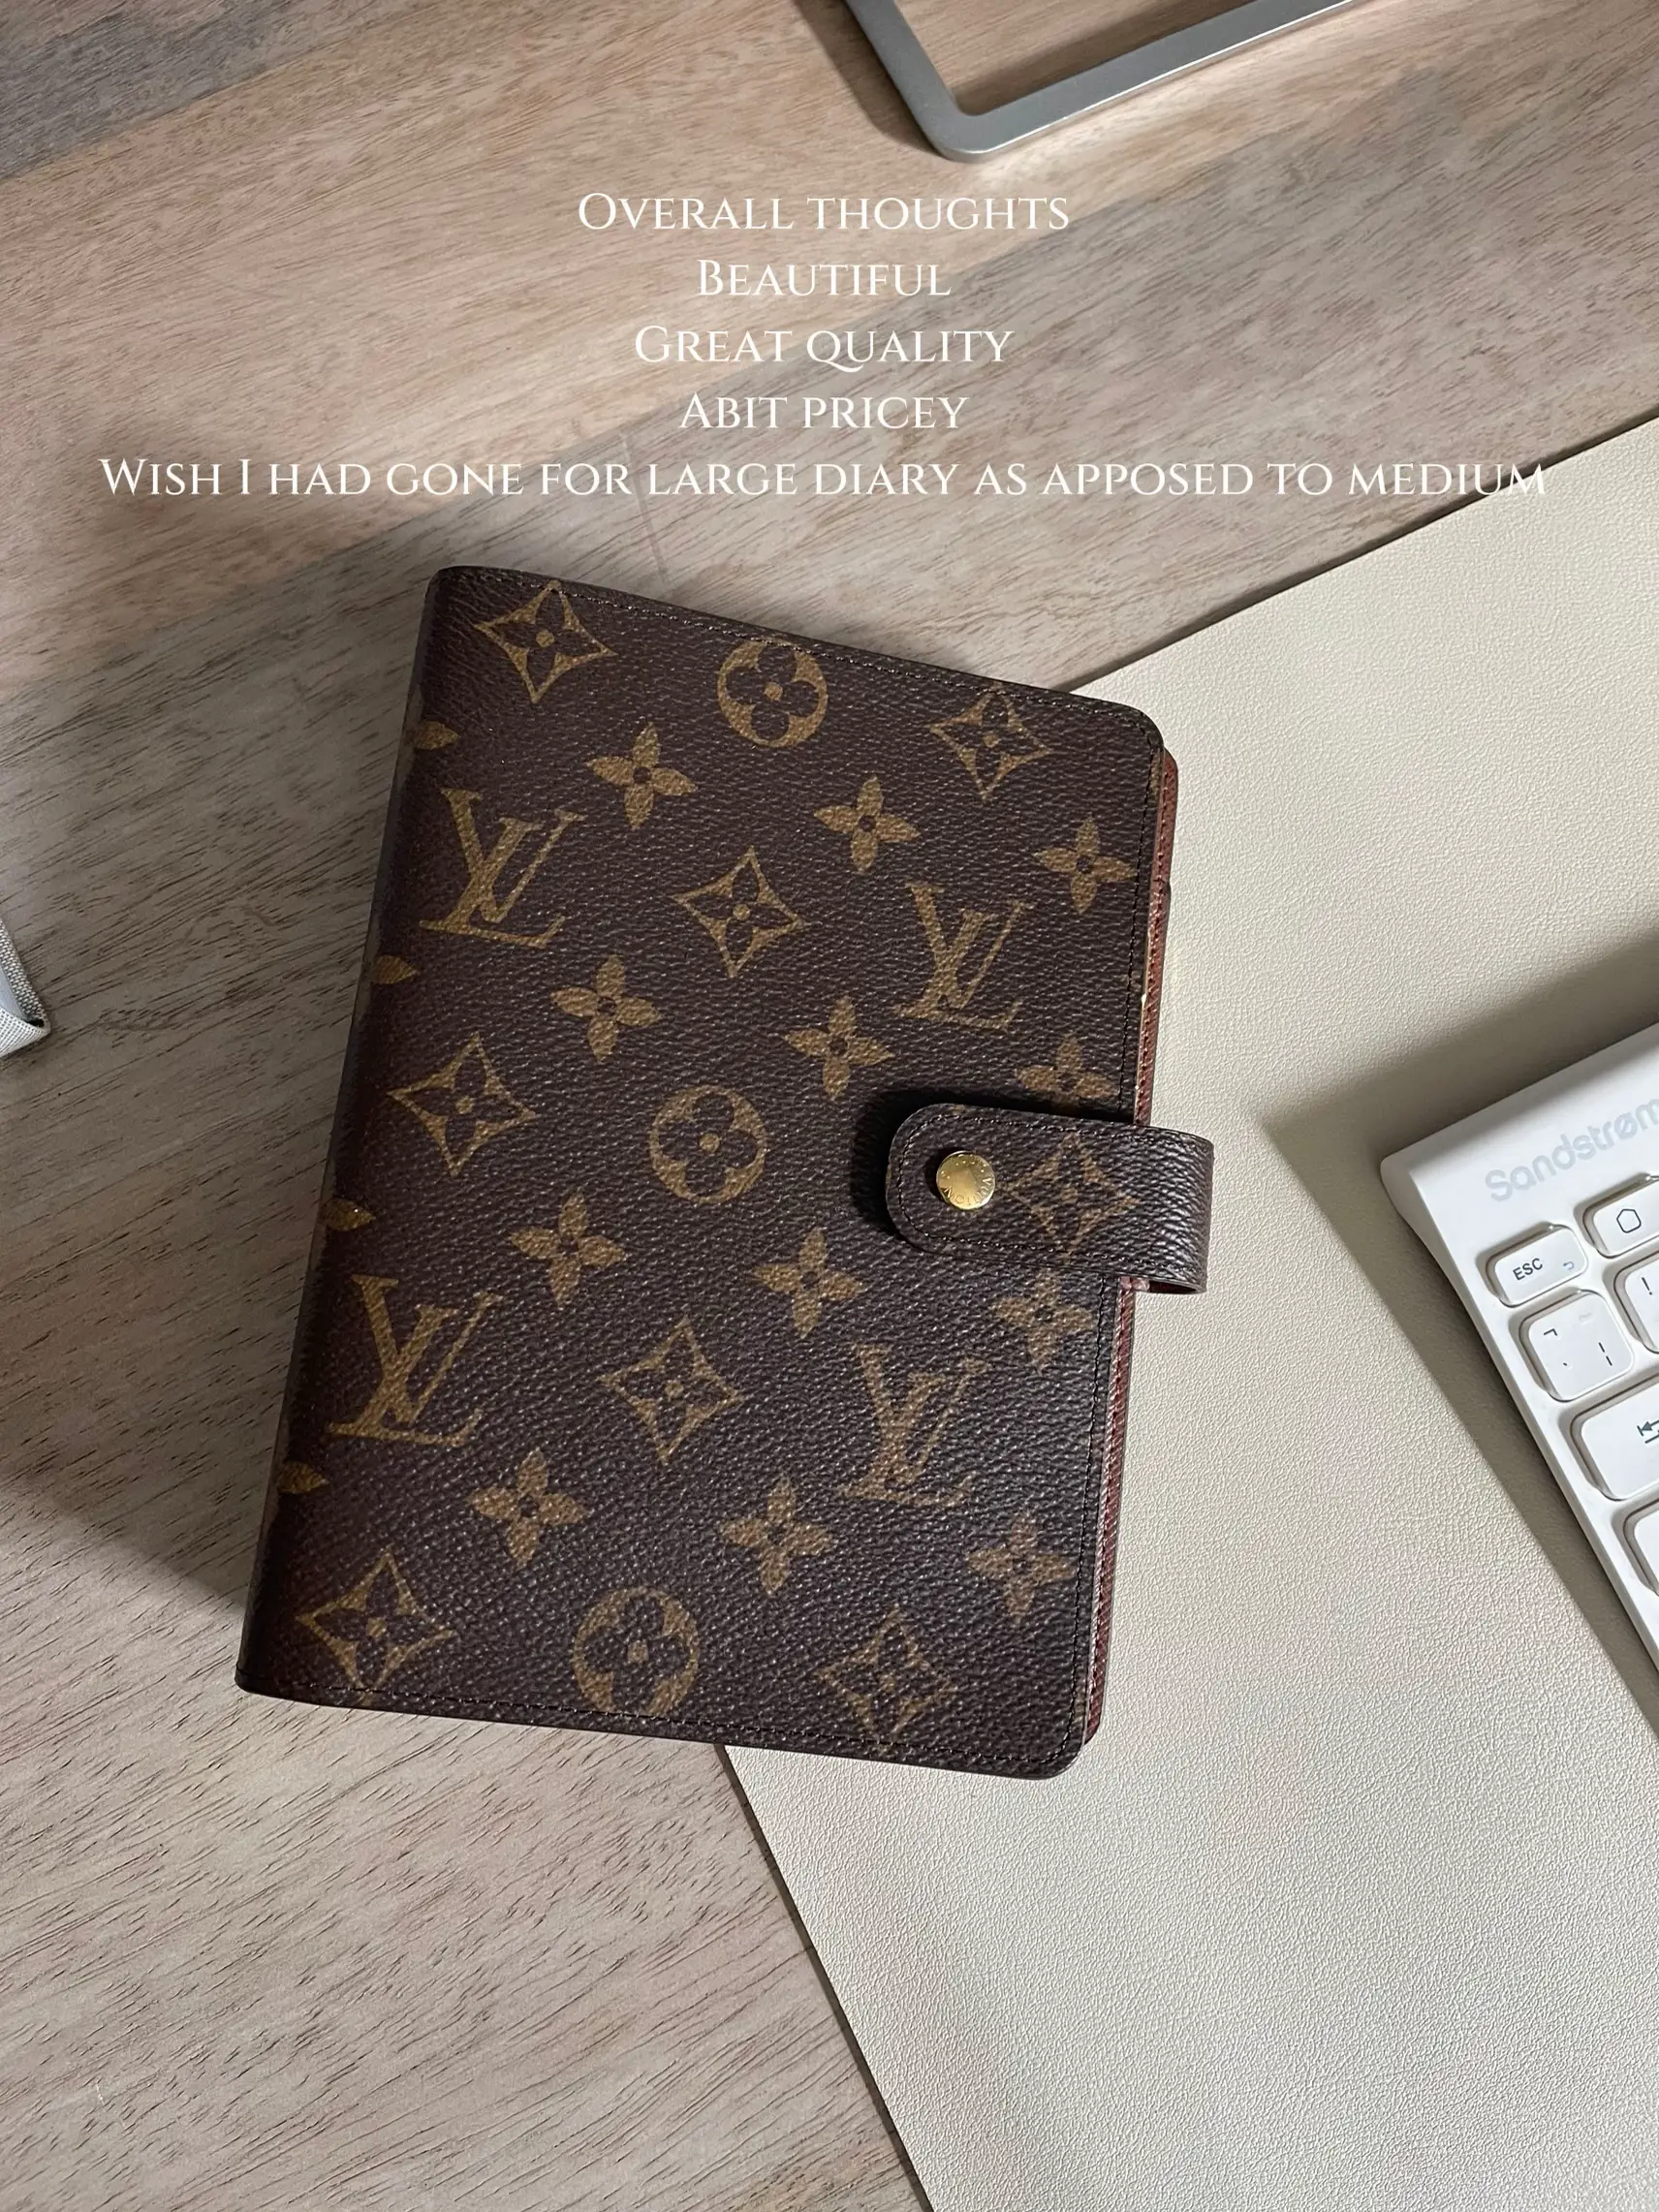 LOUIS VUITTON ONTHEGO MM, Why I'm Not Keeping it & First Impression Review